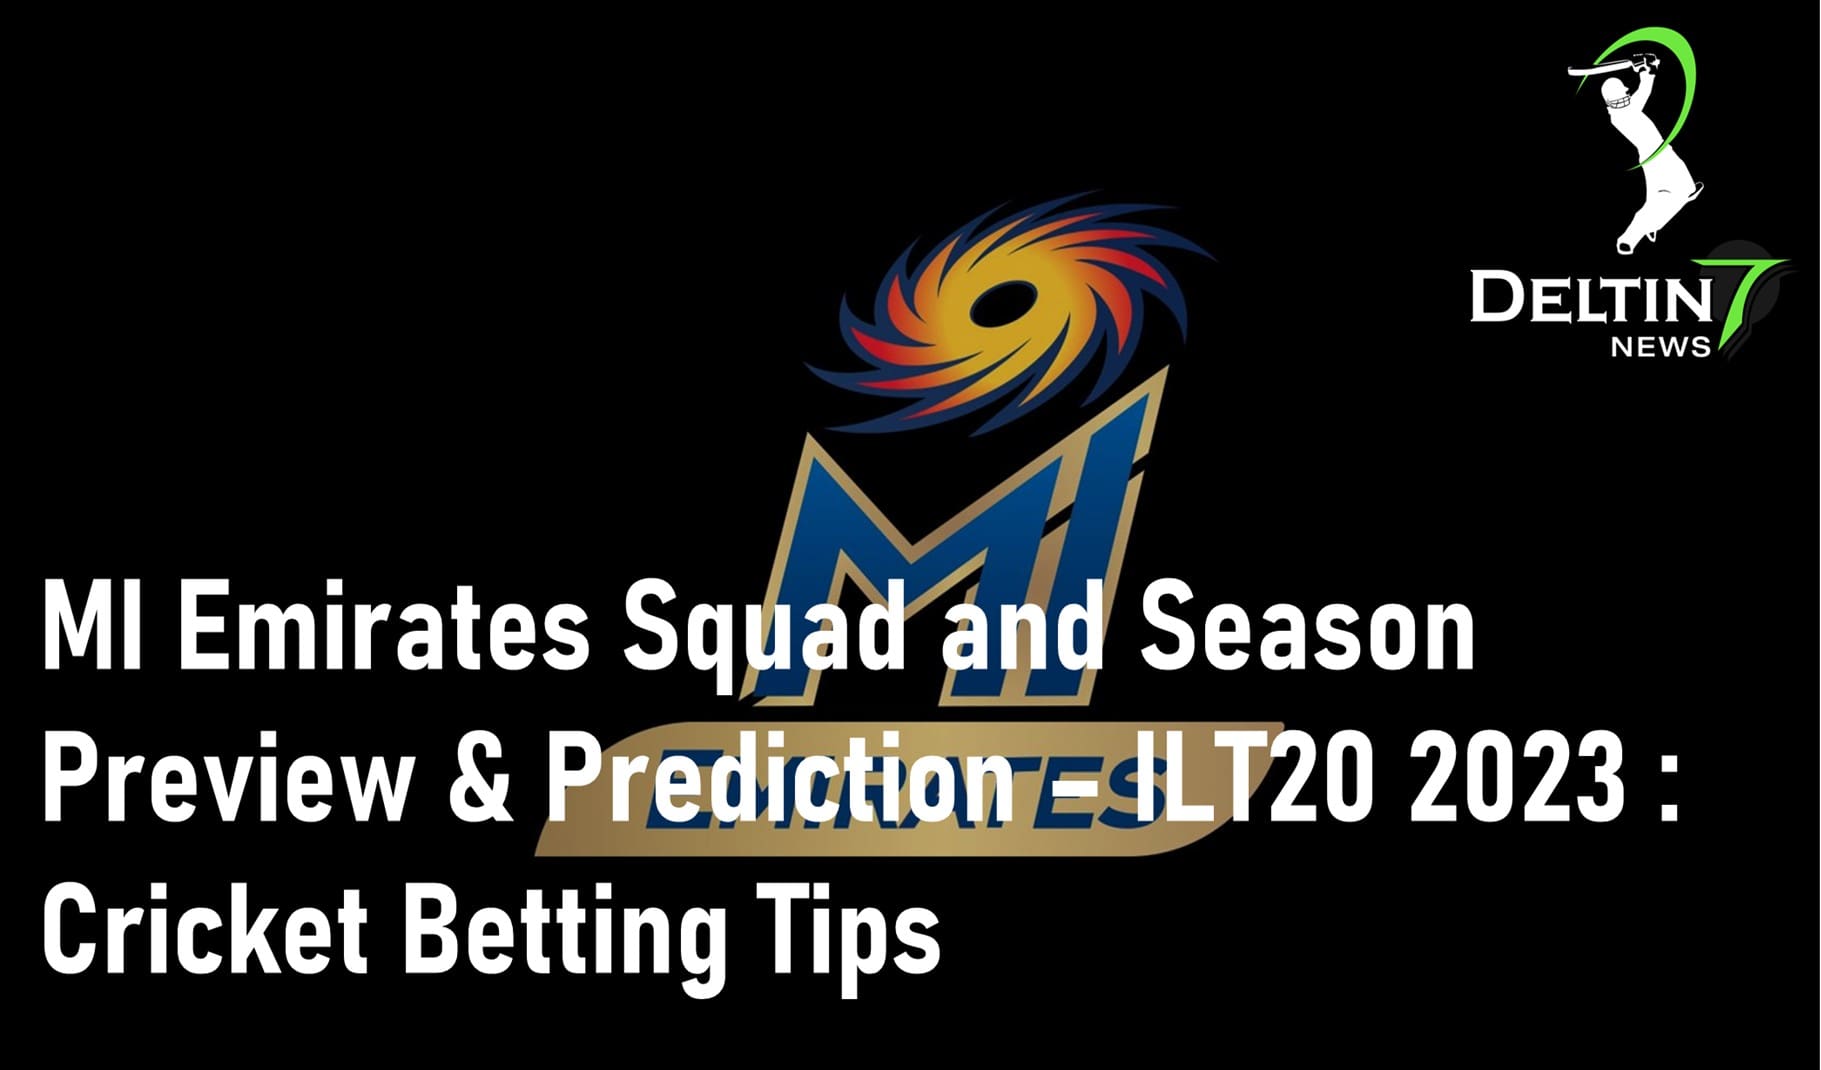 <strong>MI Emirates Squad and Season Preview & Prediction – ILT20 2023: Cricket Betting Tips</strong>